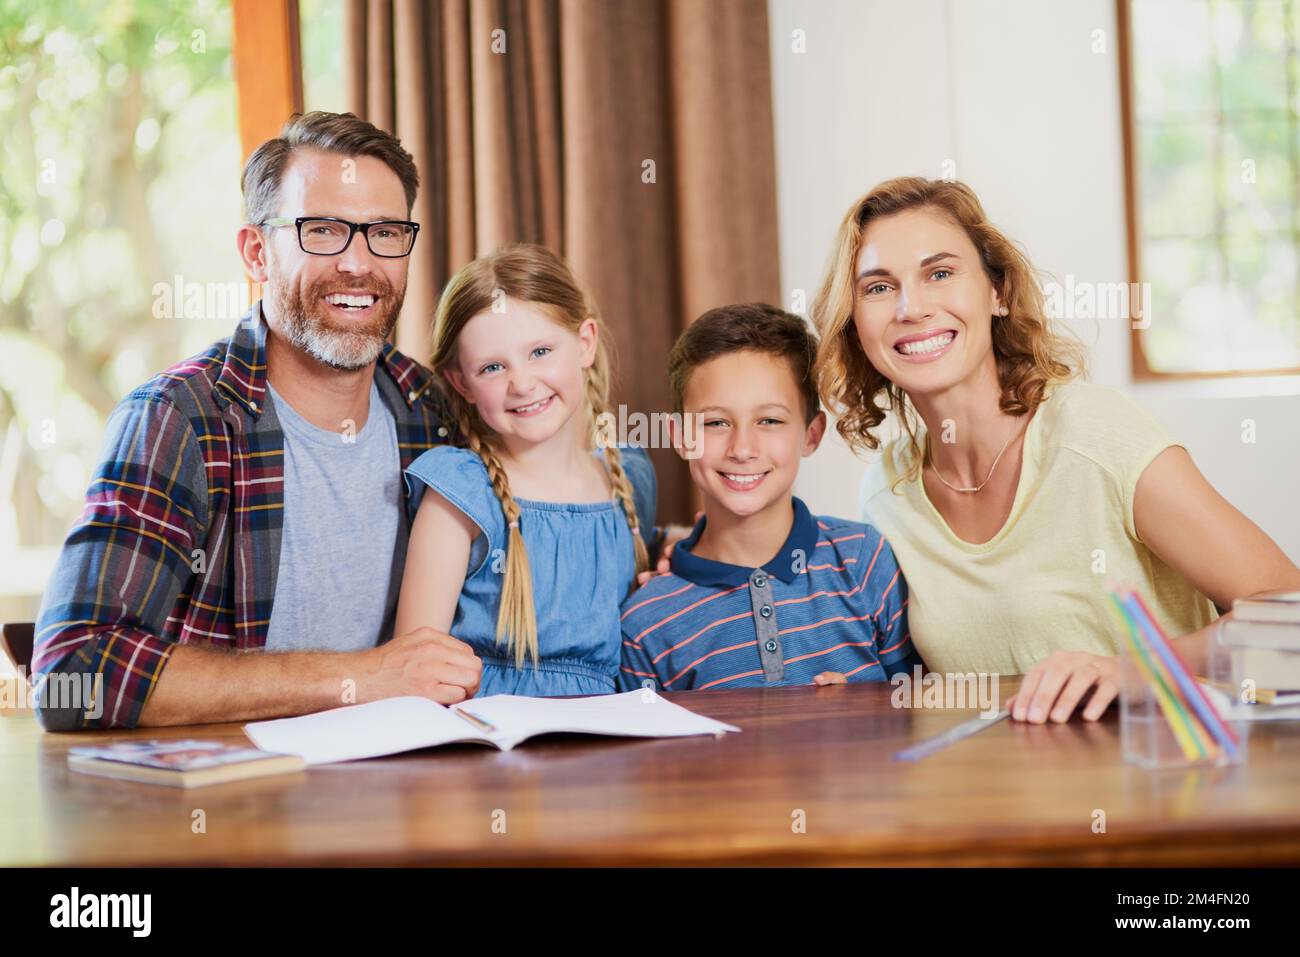 This is our family bonding educational time. two parents helping their adorable children with schoolwork at home. Stock Photo